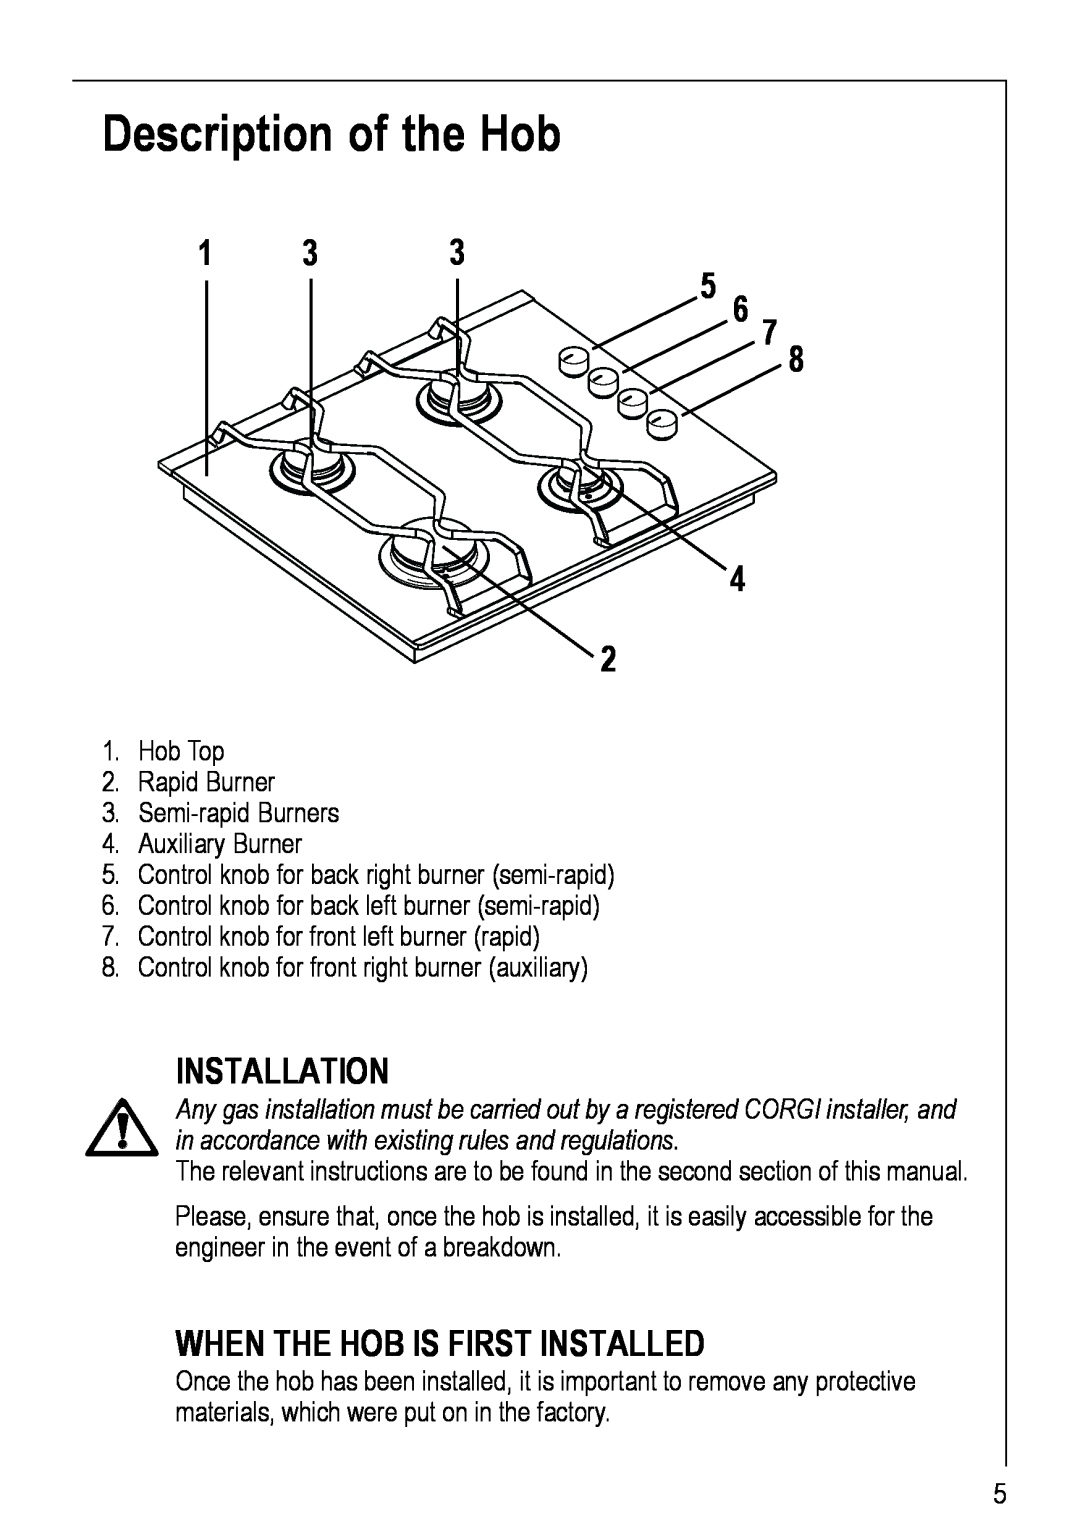 Electrolux 69802 G manual Description of the Hob, 5 6, Installation, When The Hob Is First Installed 